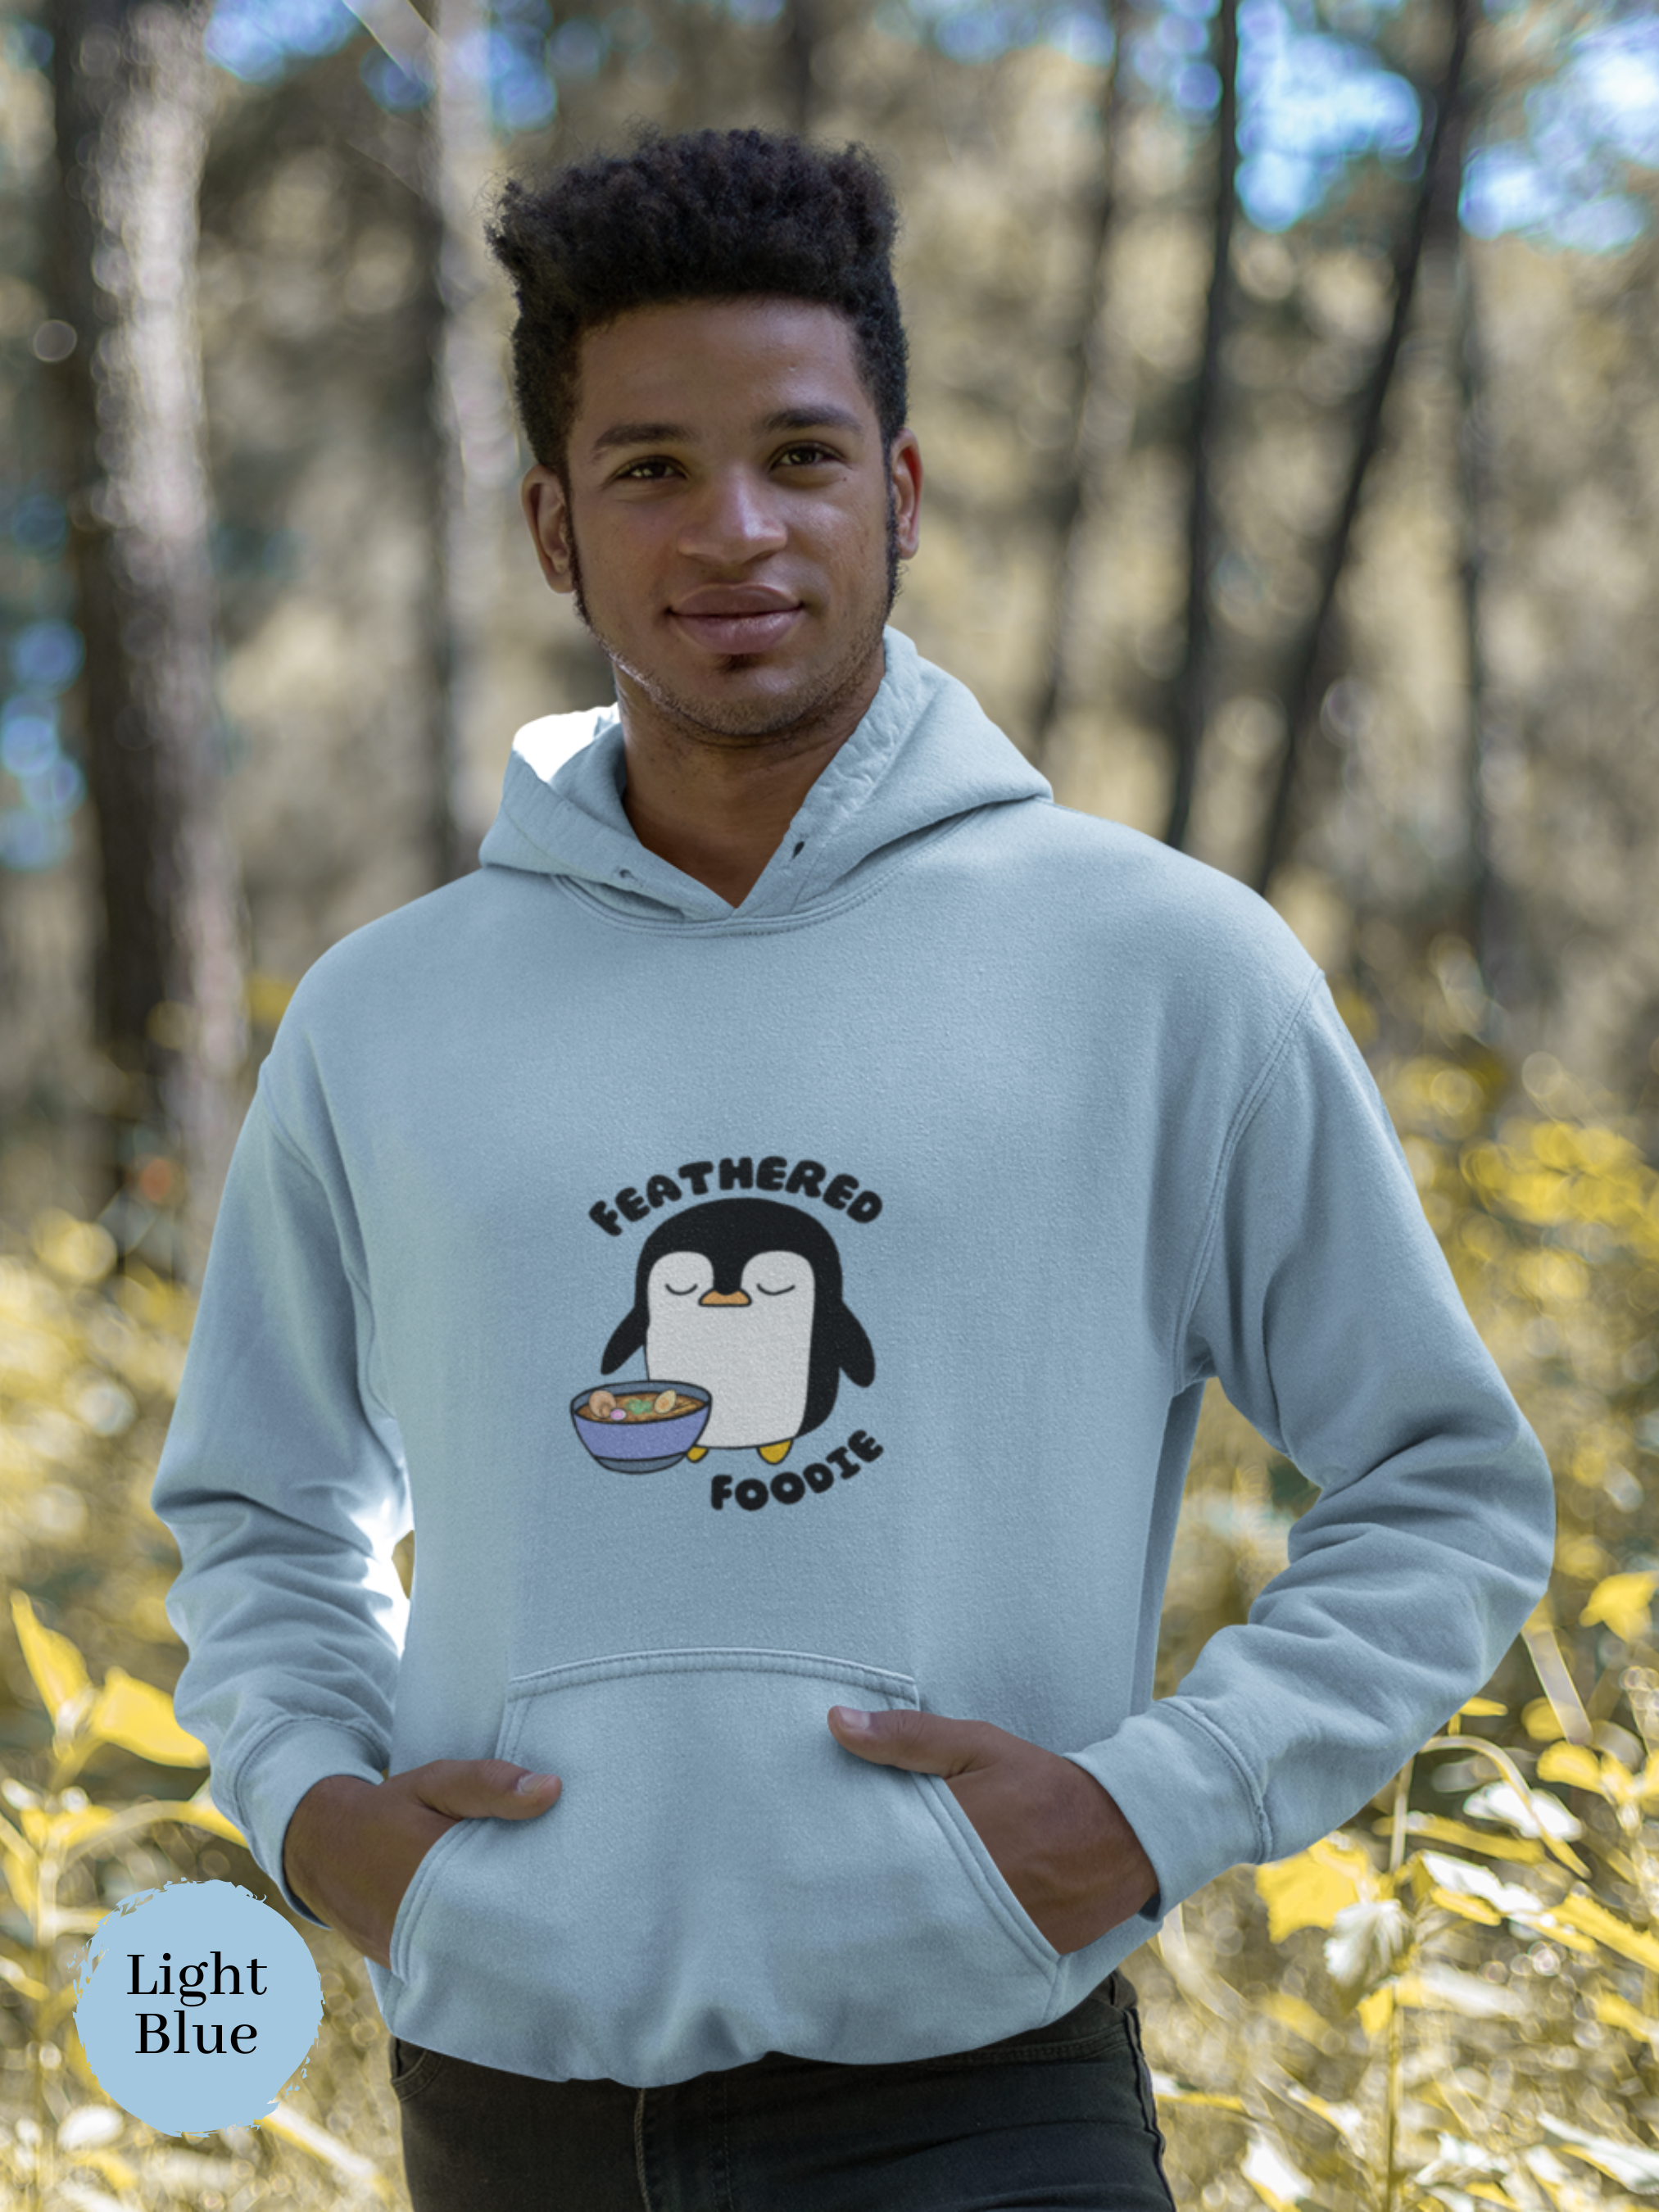 Ramen Hoodie: Feathered Foodie Edition - Asian-Inspired Comfort with a Side of Cute Penguin and Pun-tastic Ramen Art